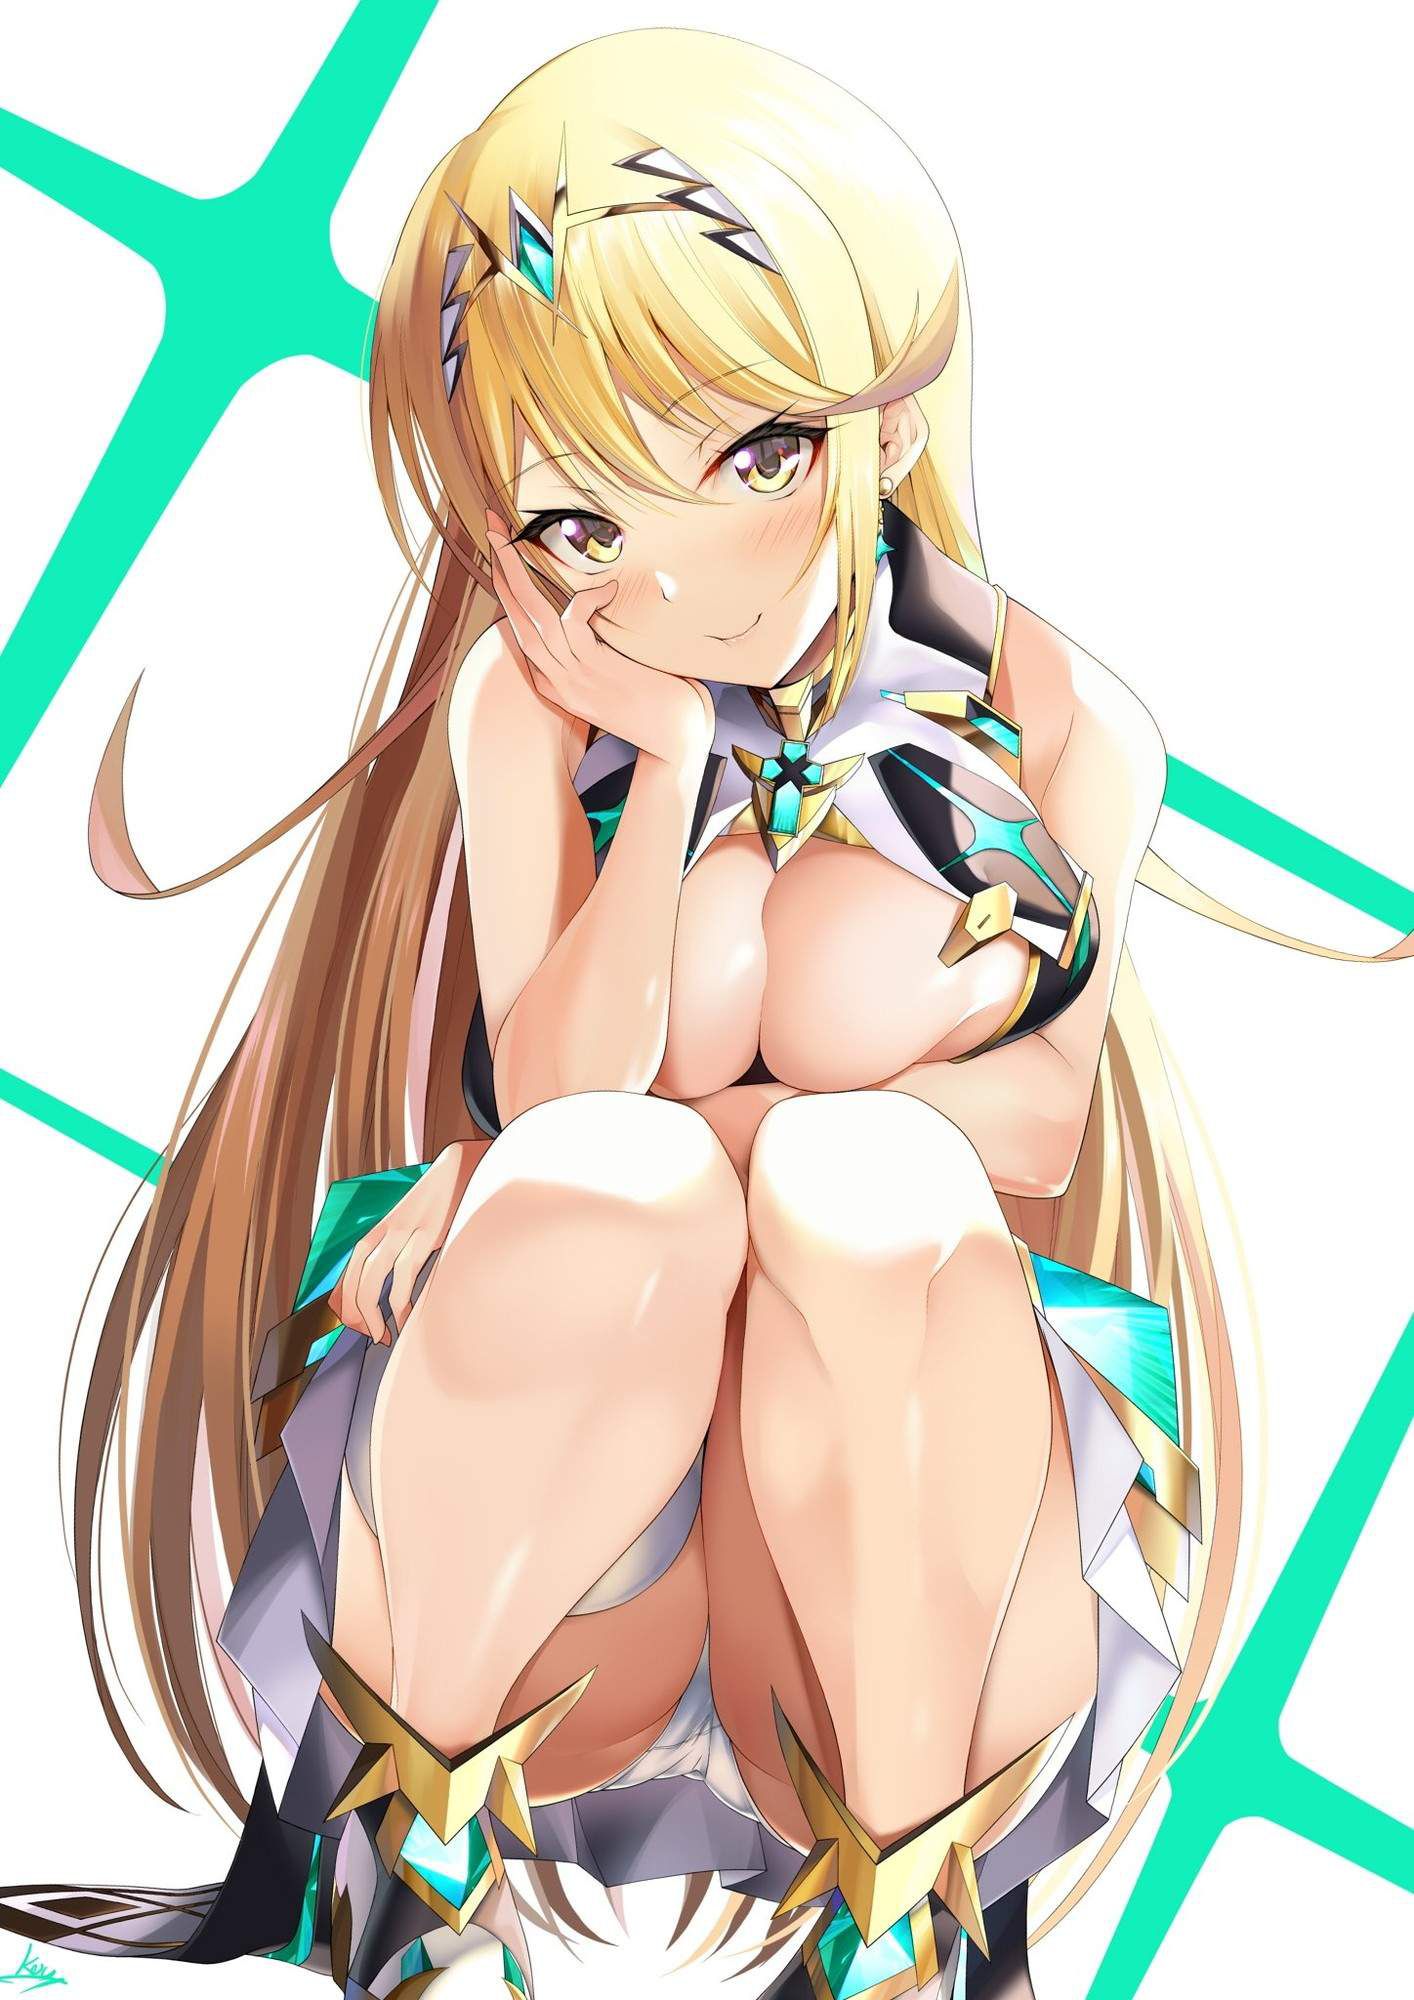 "Where are you looking~?" A soft-looking defenseless crotch image ♪ of a girl squatting with her eyes 26